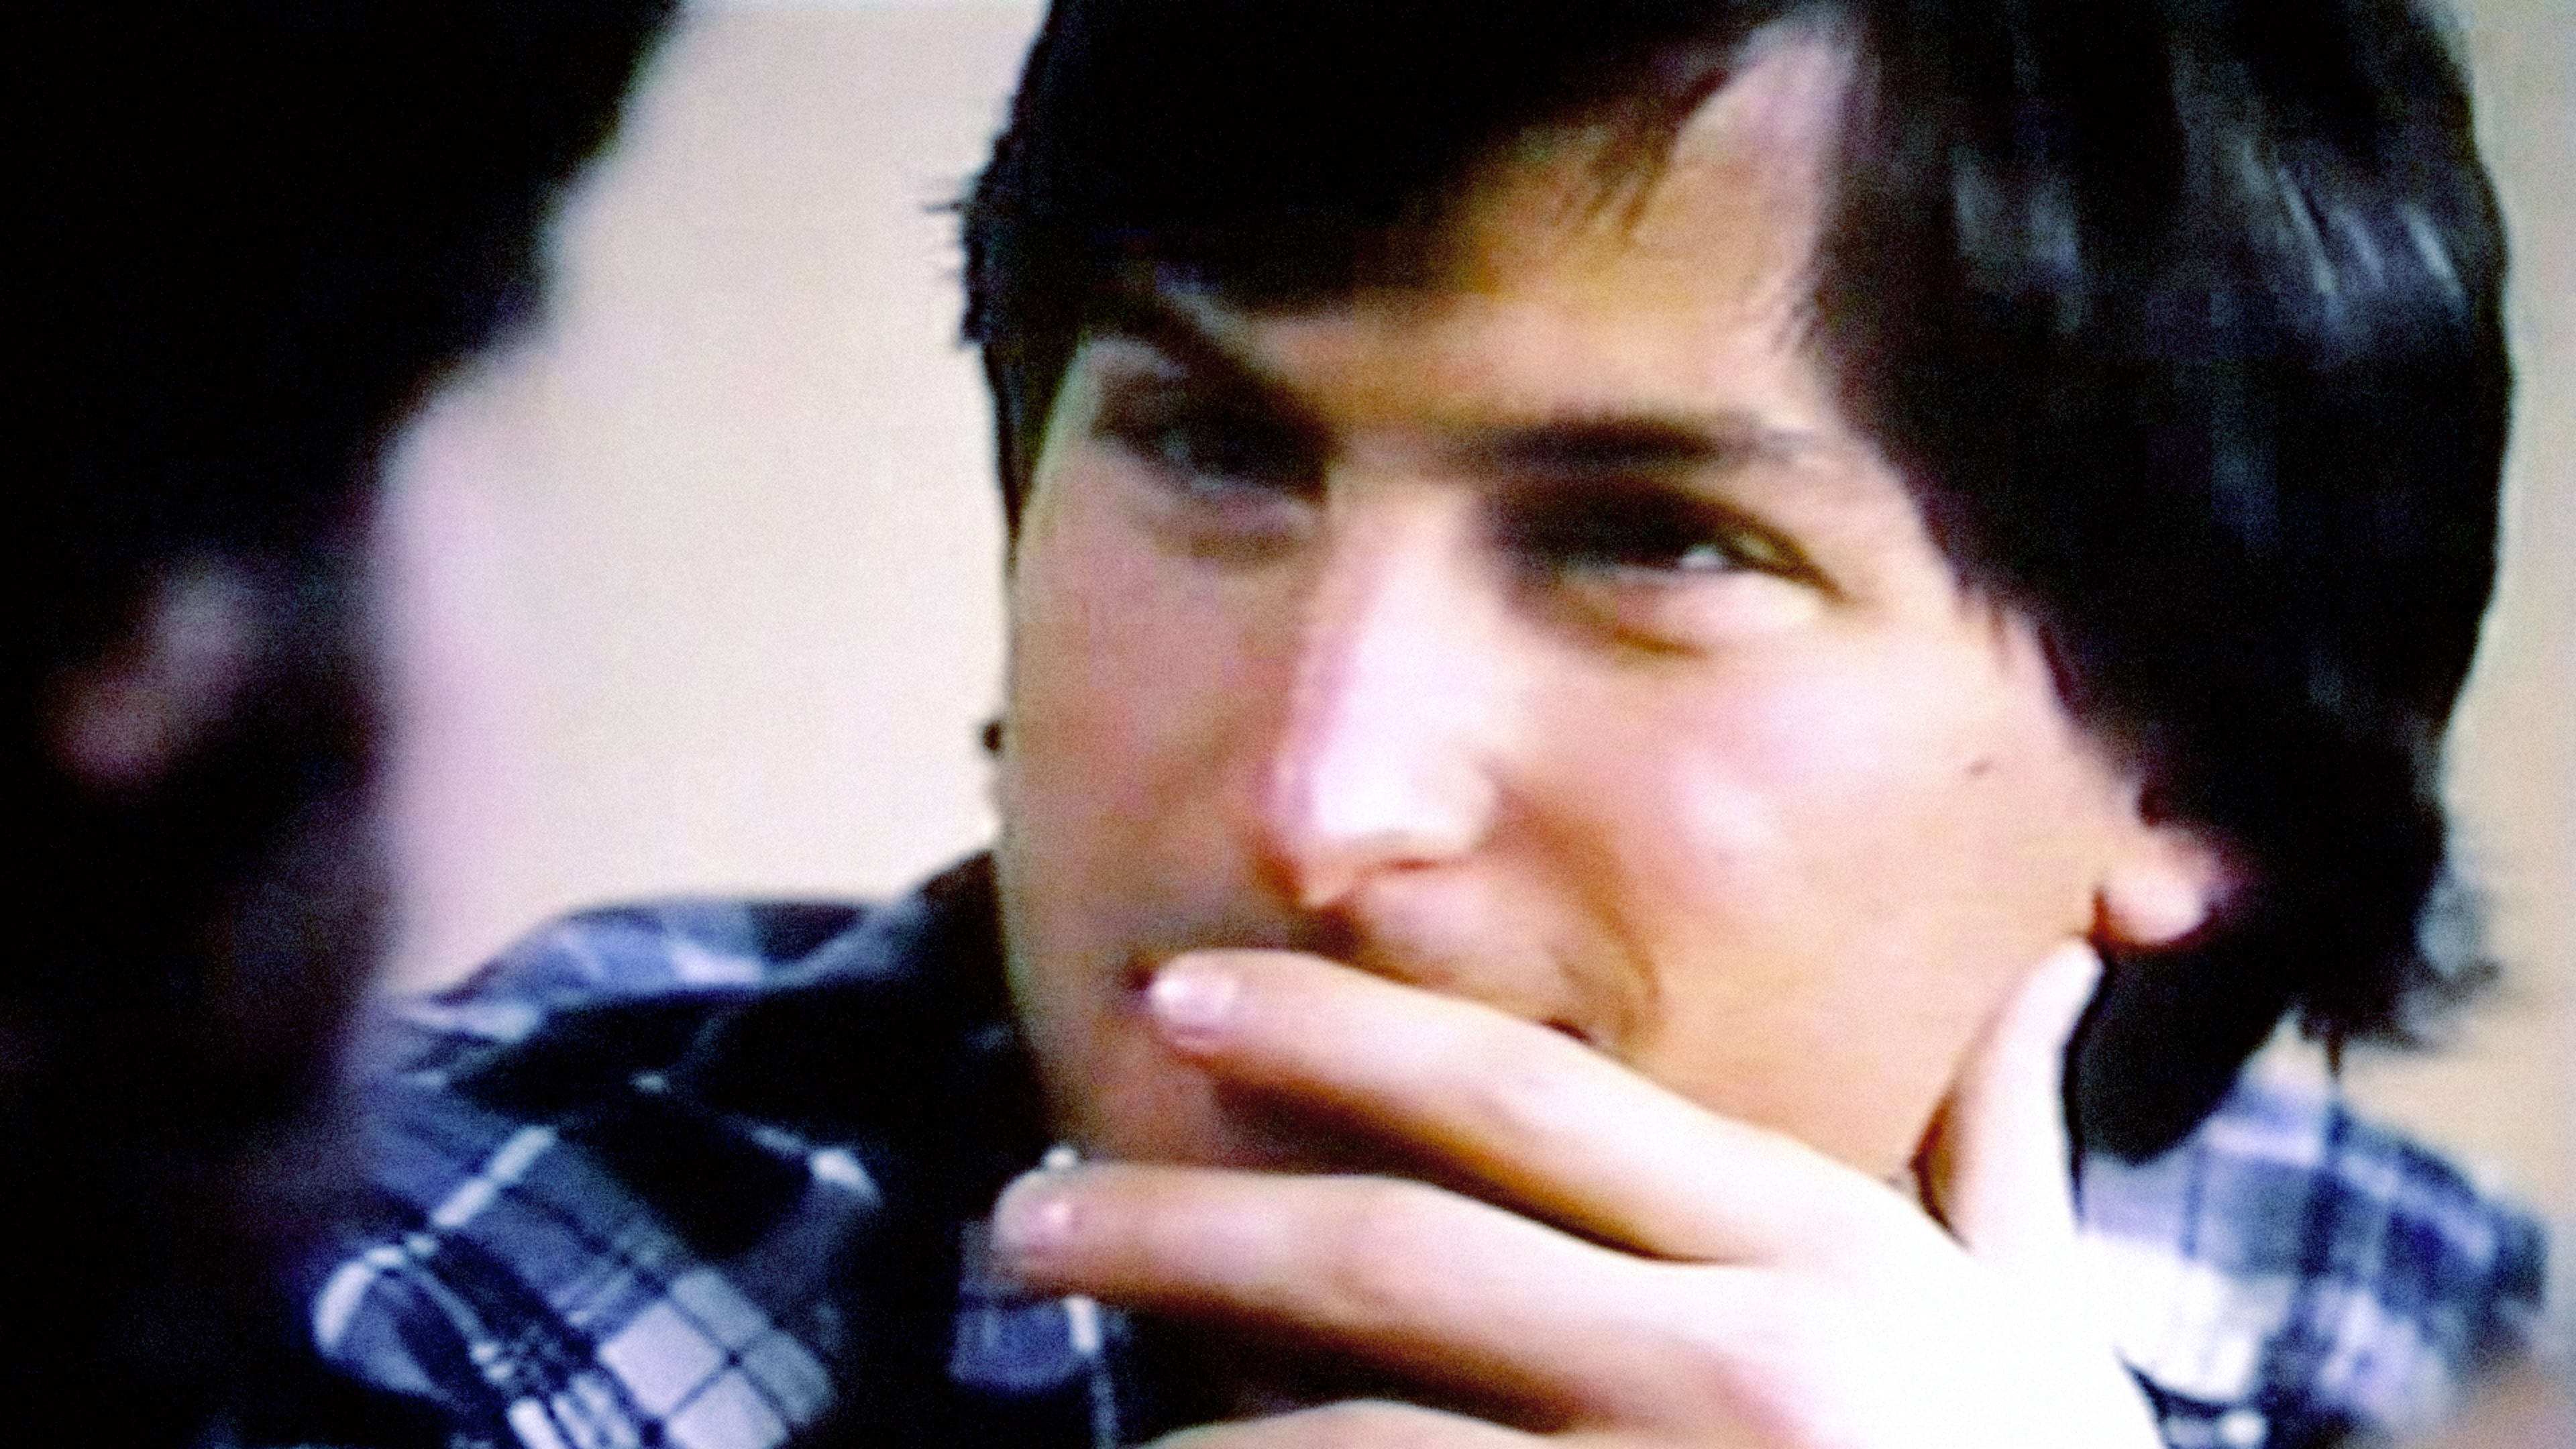 In A Little-Seen Early Apple Video, Jobs And Wozniak Talk About The Company’s Beginnings